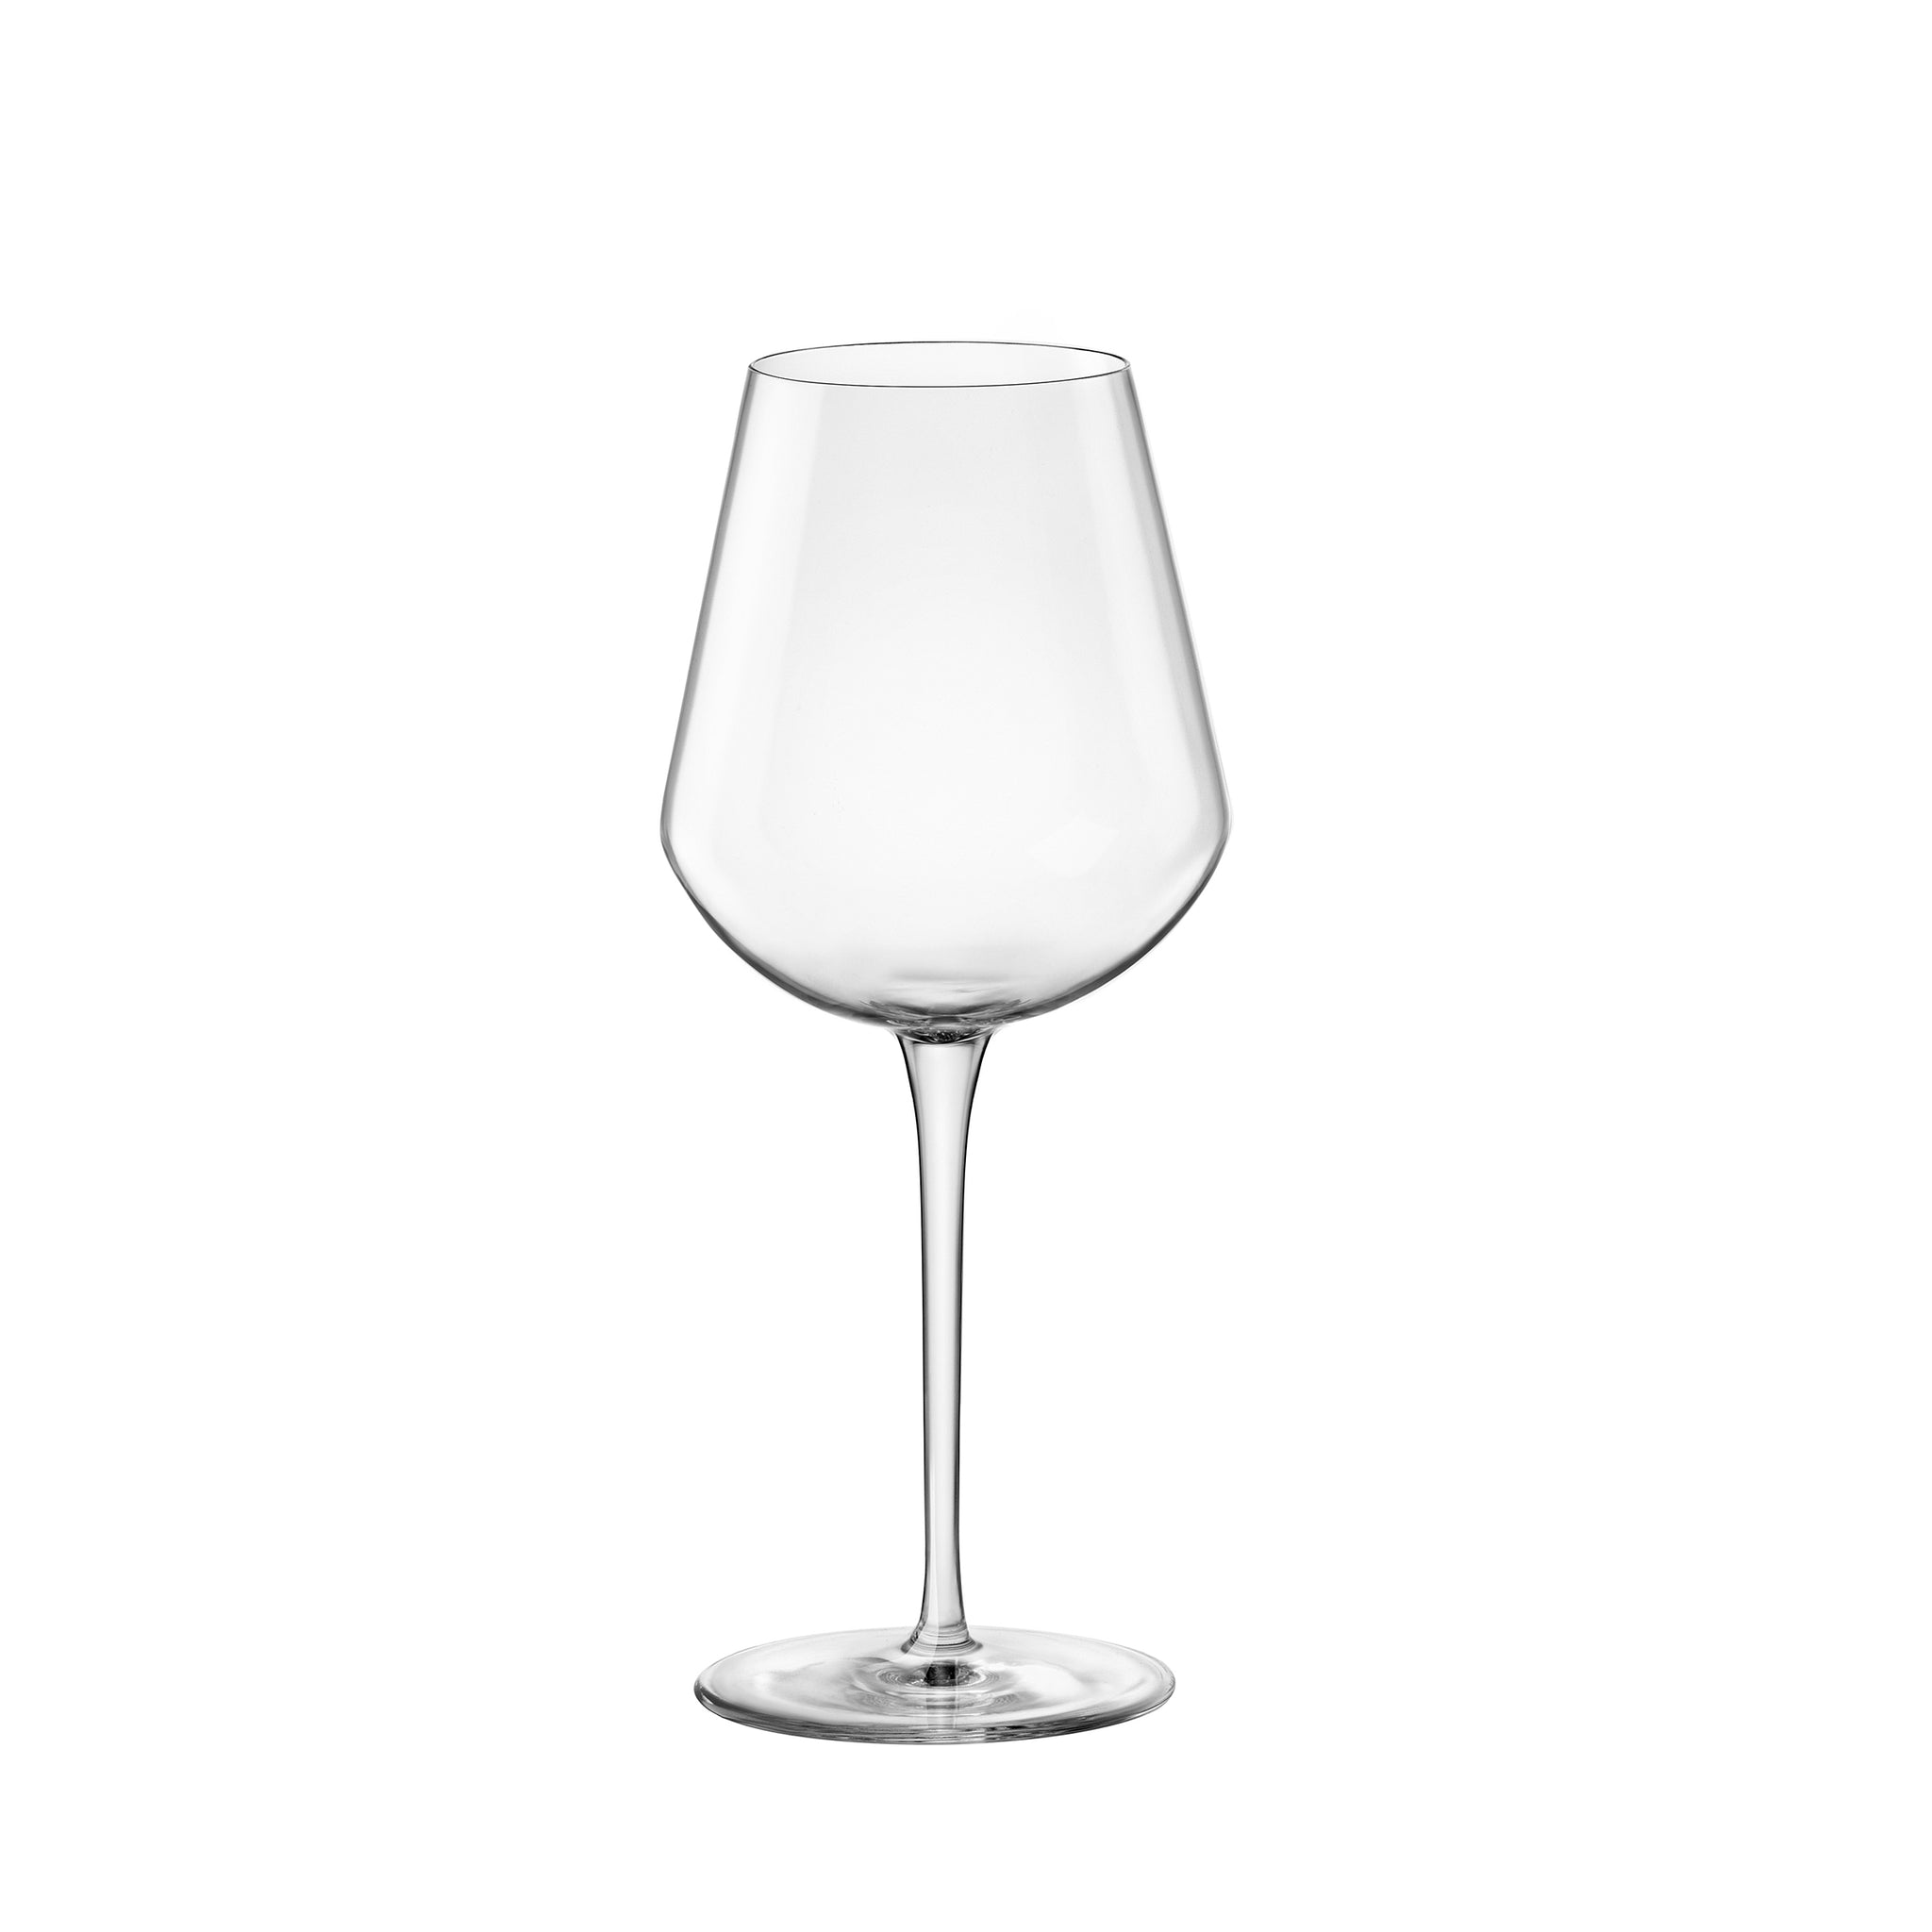 InAlto Uno 18.75 oz. Large Red Wine Glasses (Set of 6)